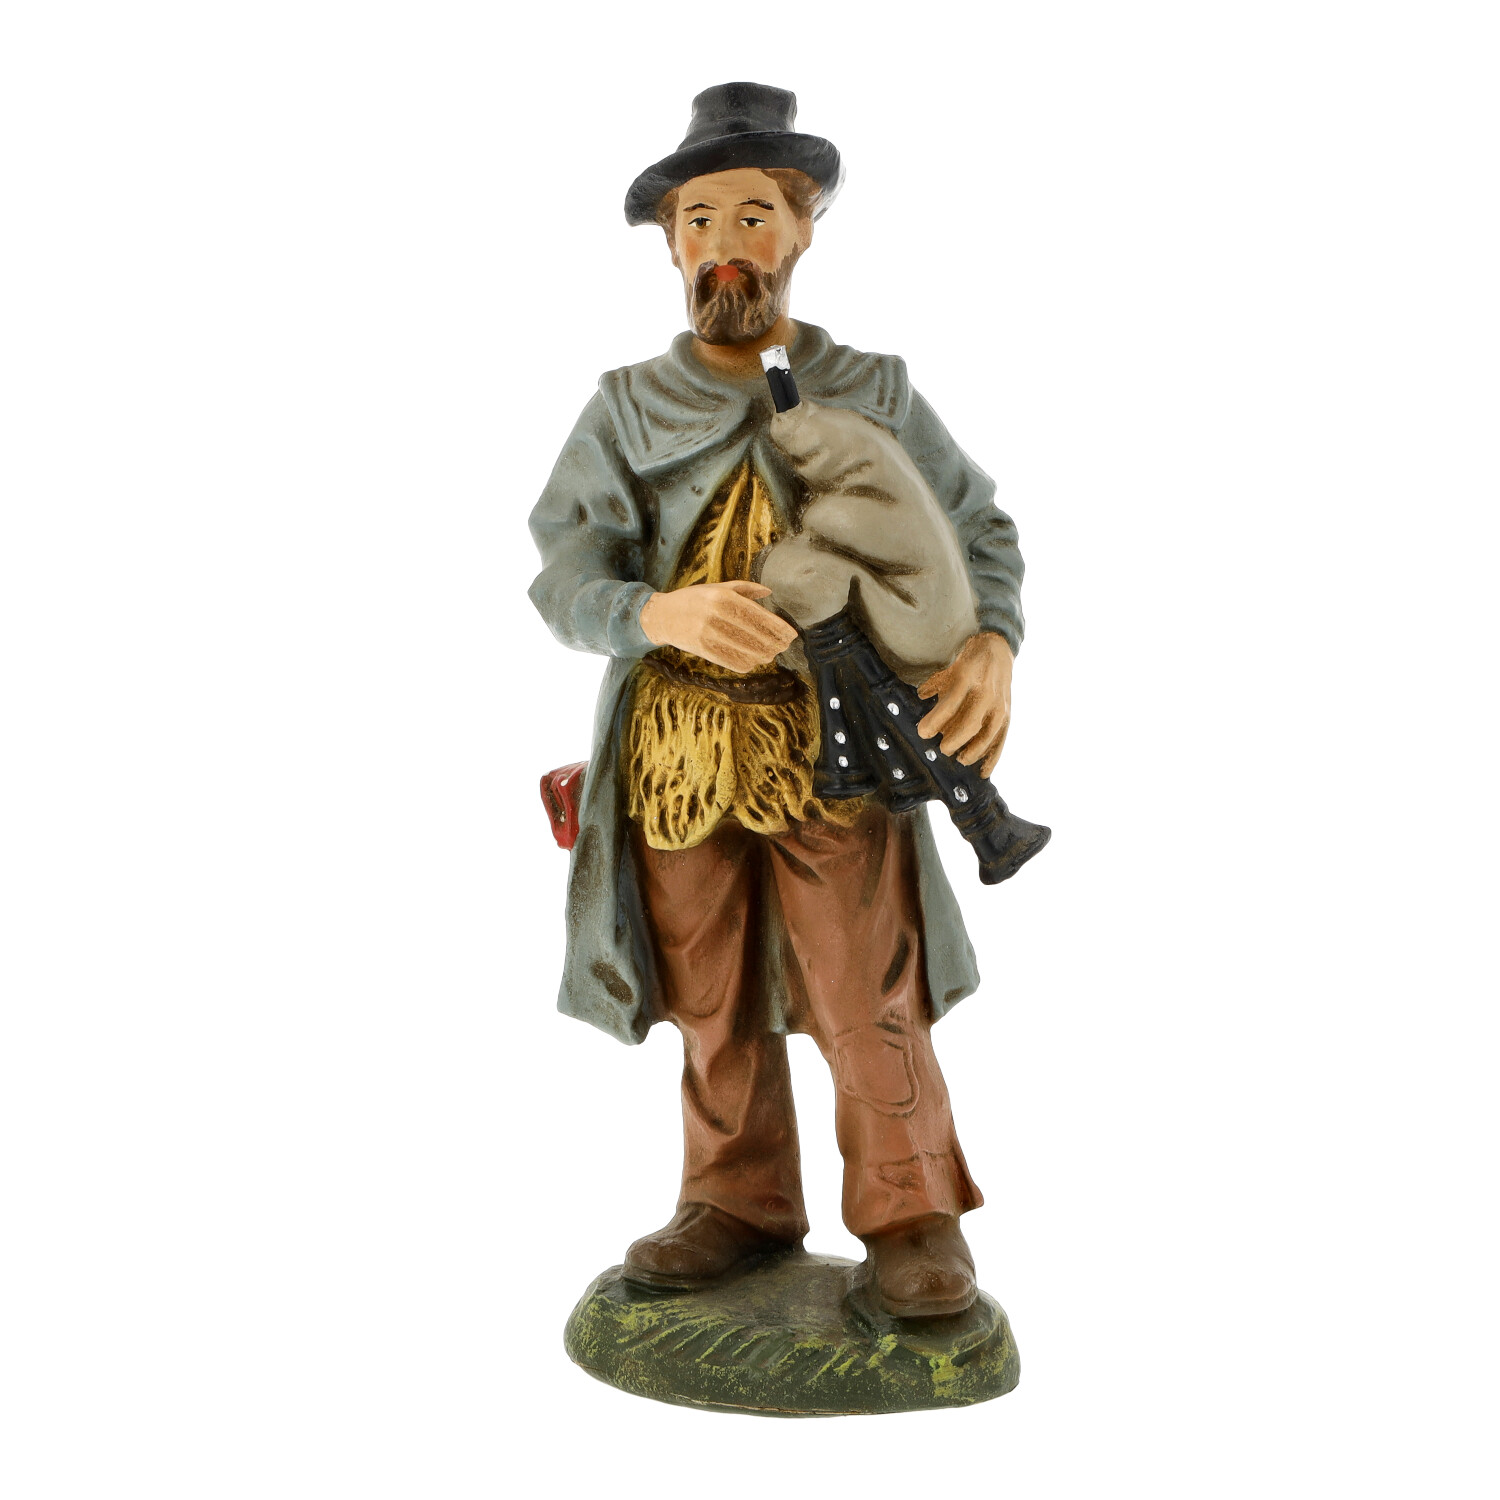 Old shepherd with bagpipe - Marolin - made in Germany